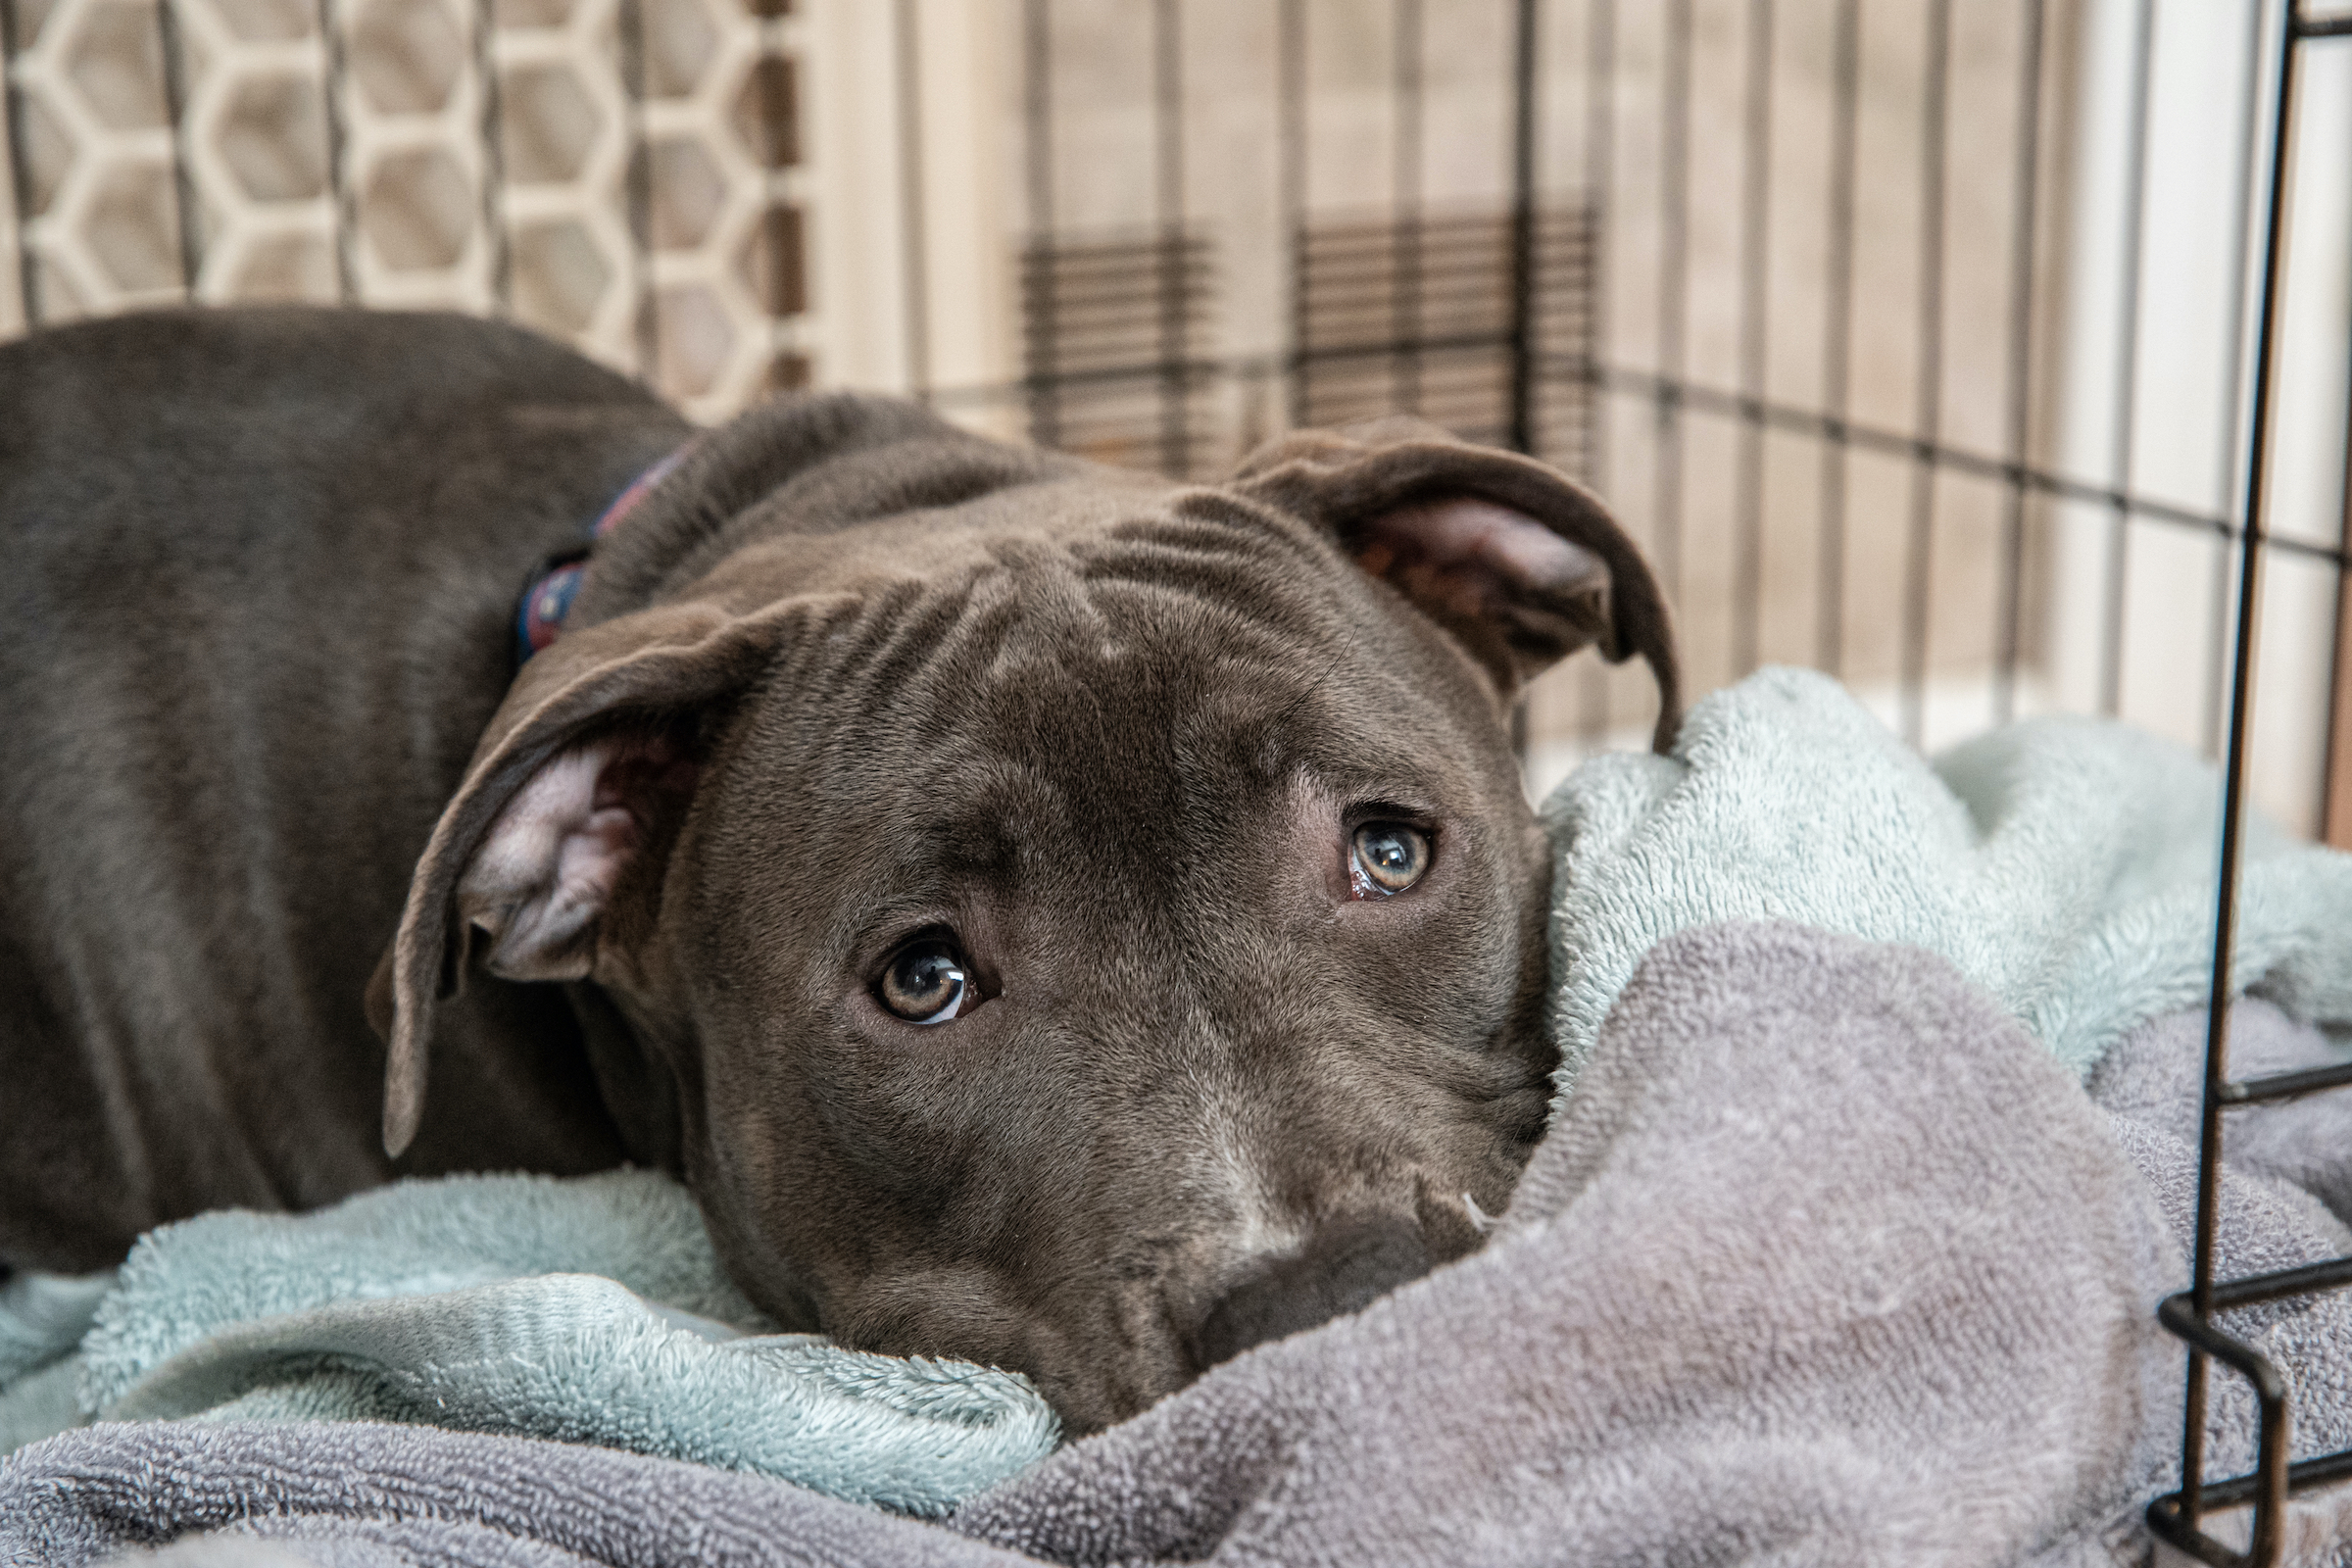 a pitbull puppy lies in their crate with their head nestled in blankets, looking up with sad eyes